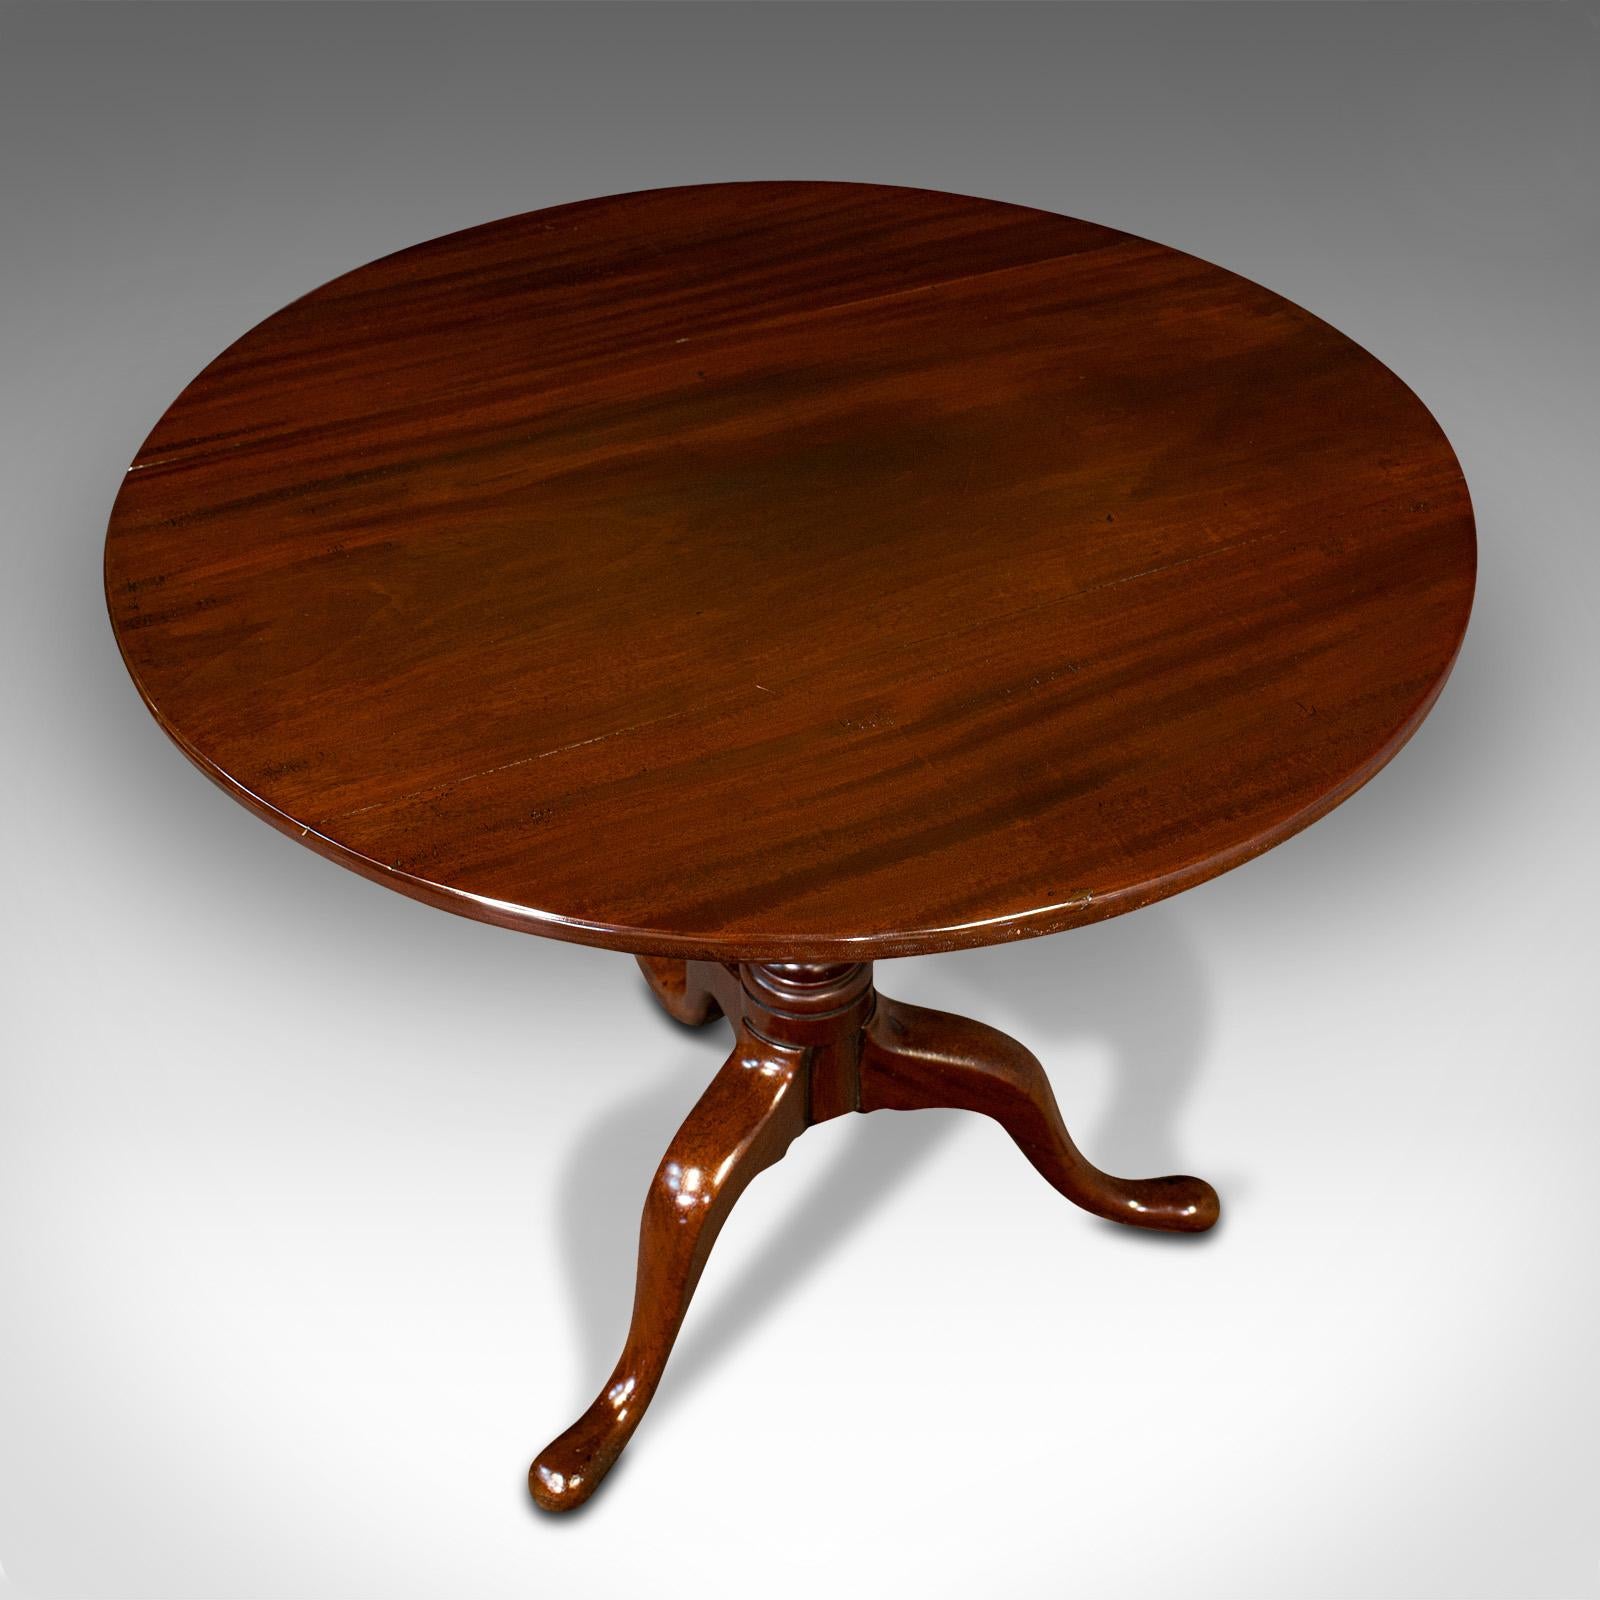 Antique Tilt Top Occasional Table, English, Mahogany, Side, Lamp, Georgian, 1800 For Sale 2